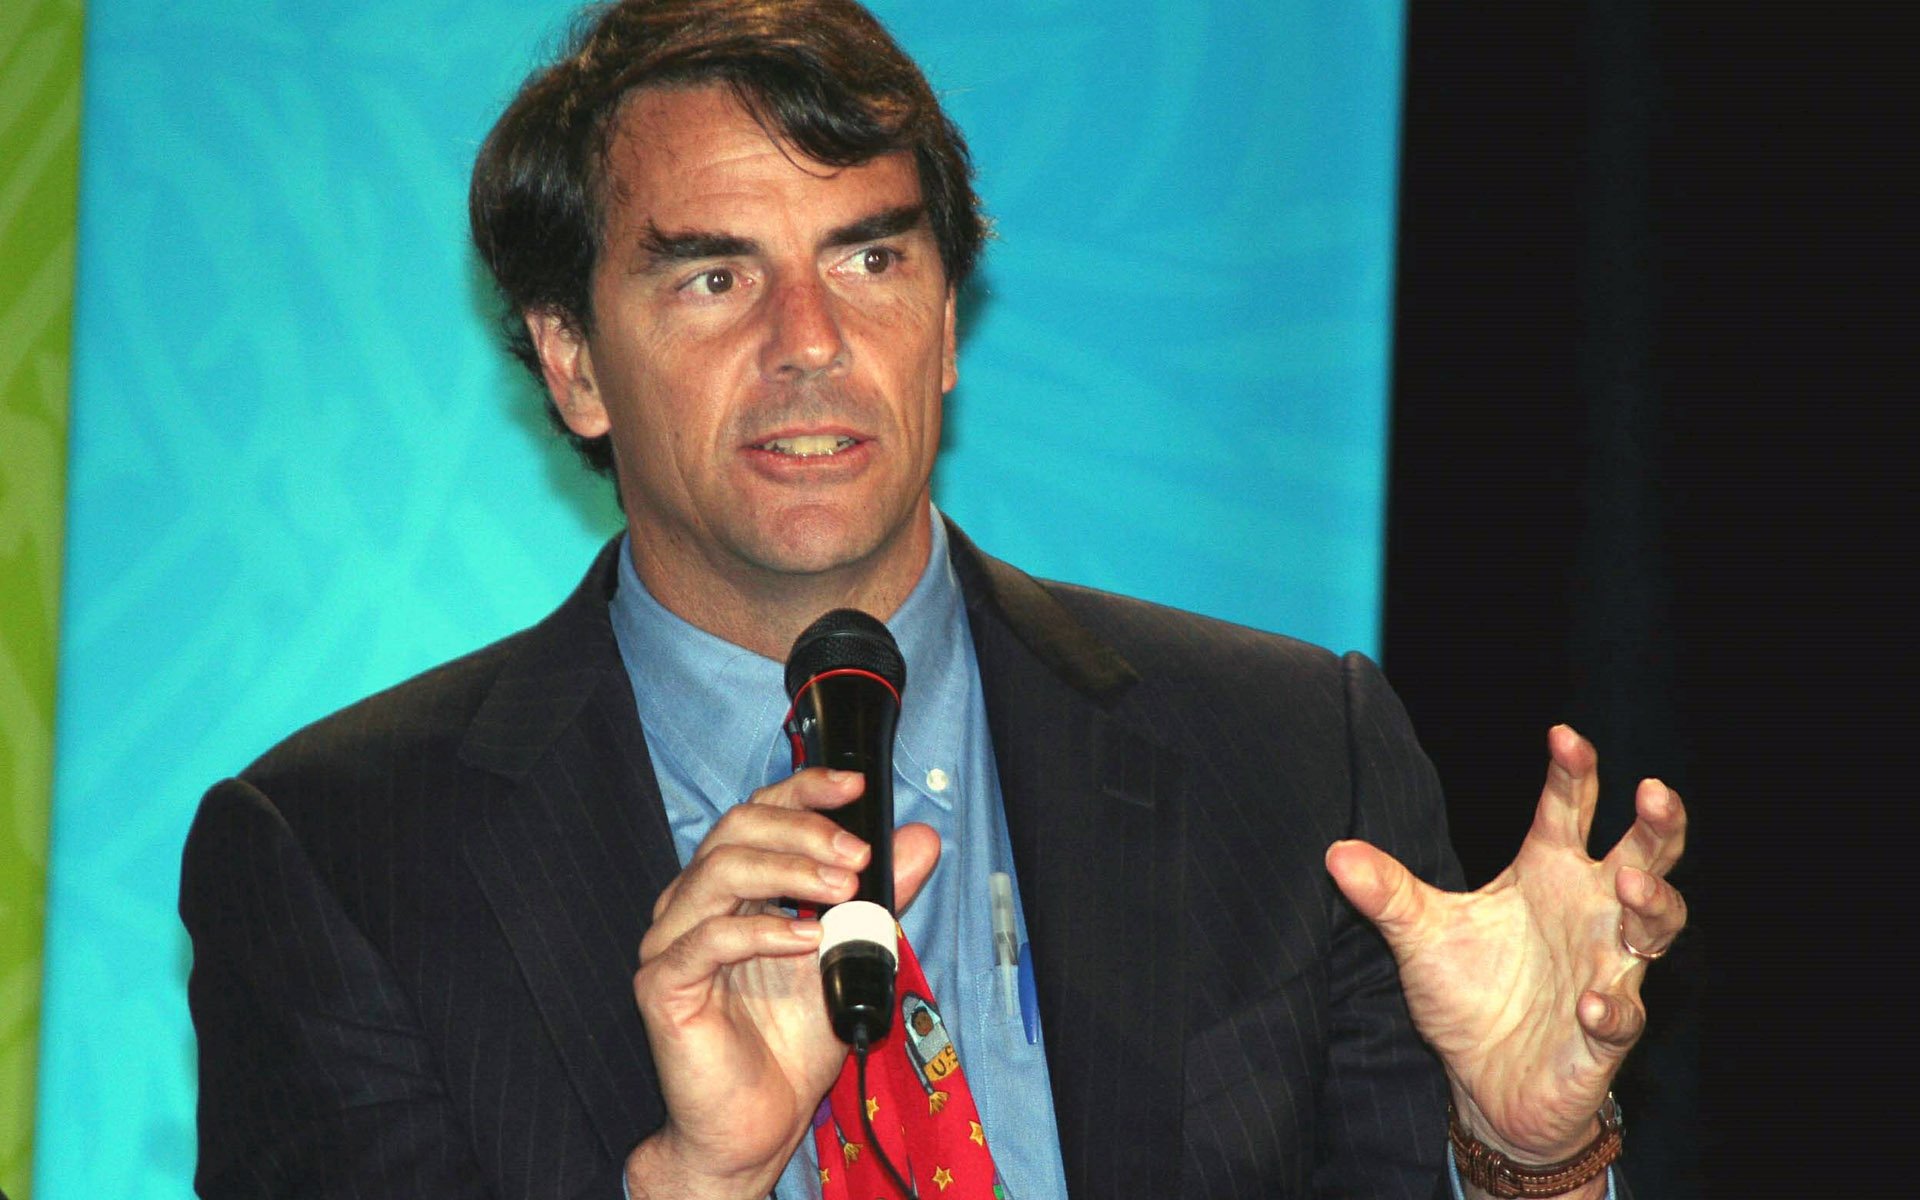 Tim Draper: Why Would I Sell Bitcoin, The Future of Currency?